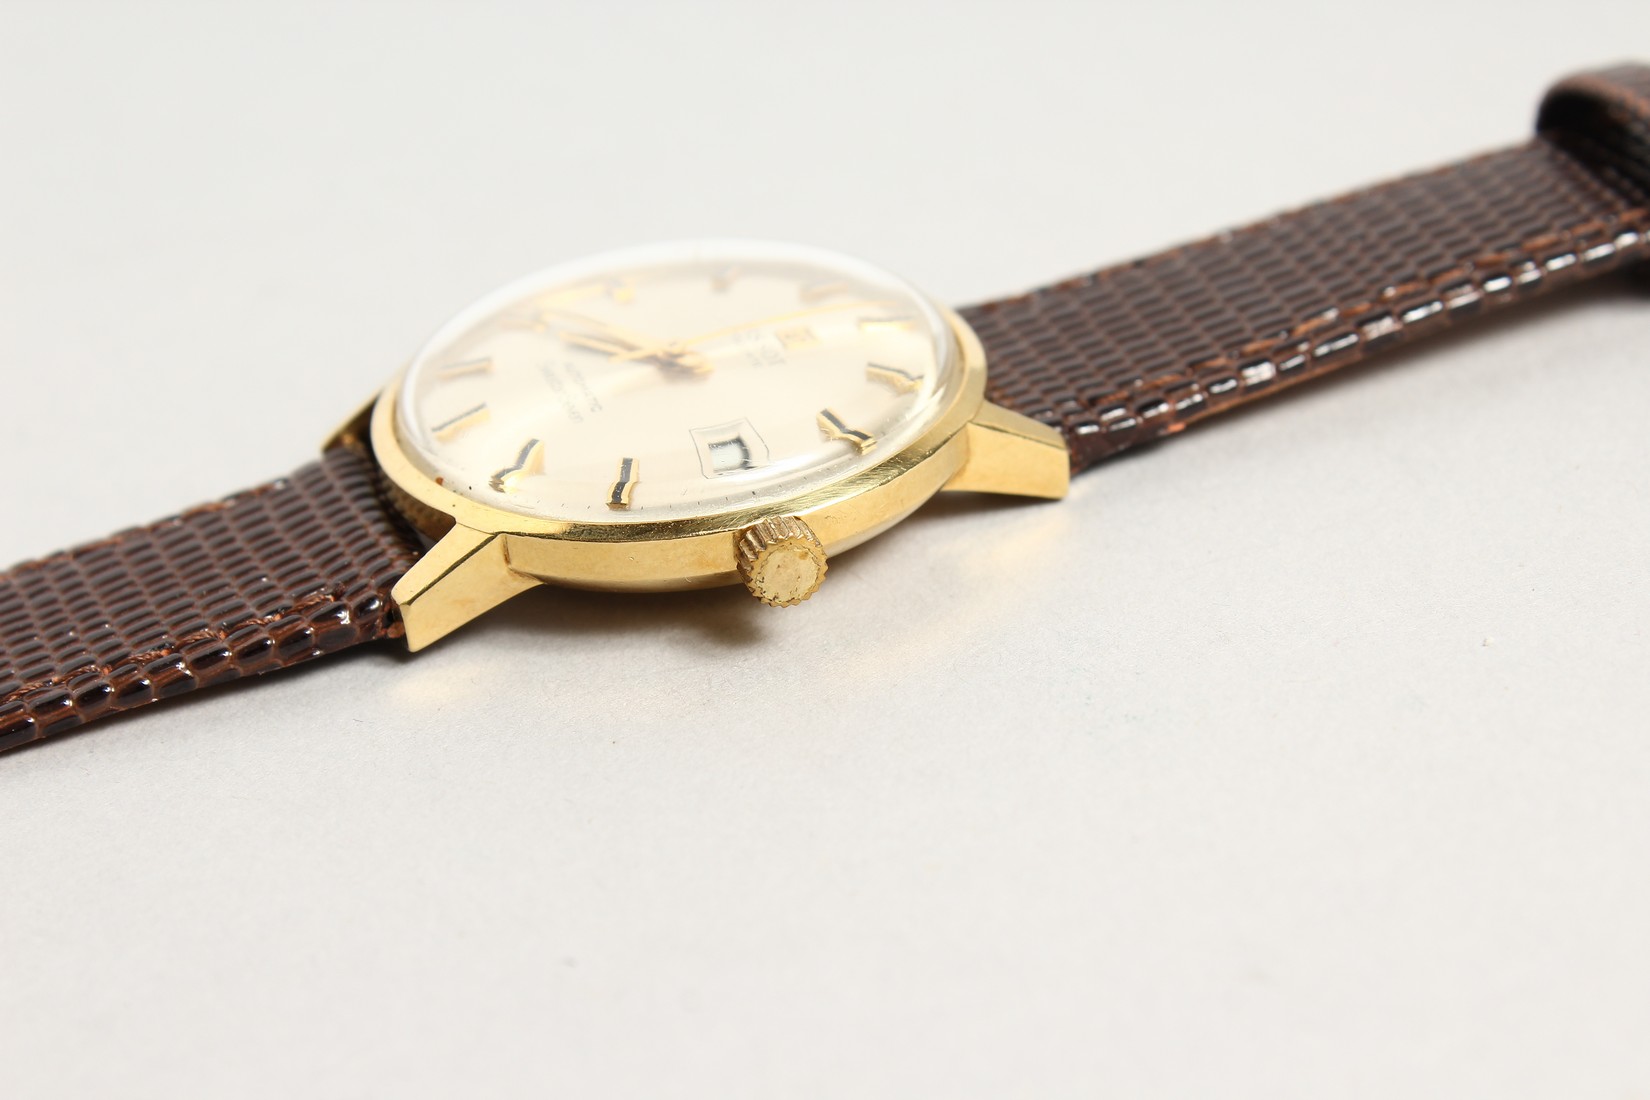 AN 18CT TISSOT SEASTAR AUTO WATCH with leather strap - Image 3 of 4